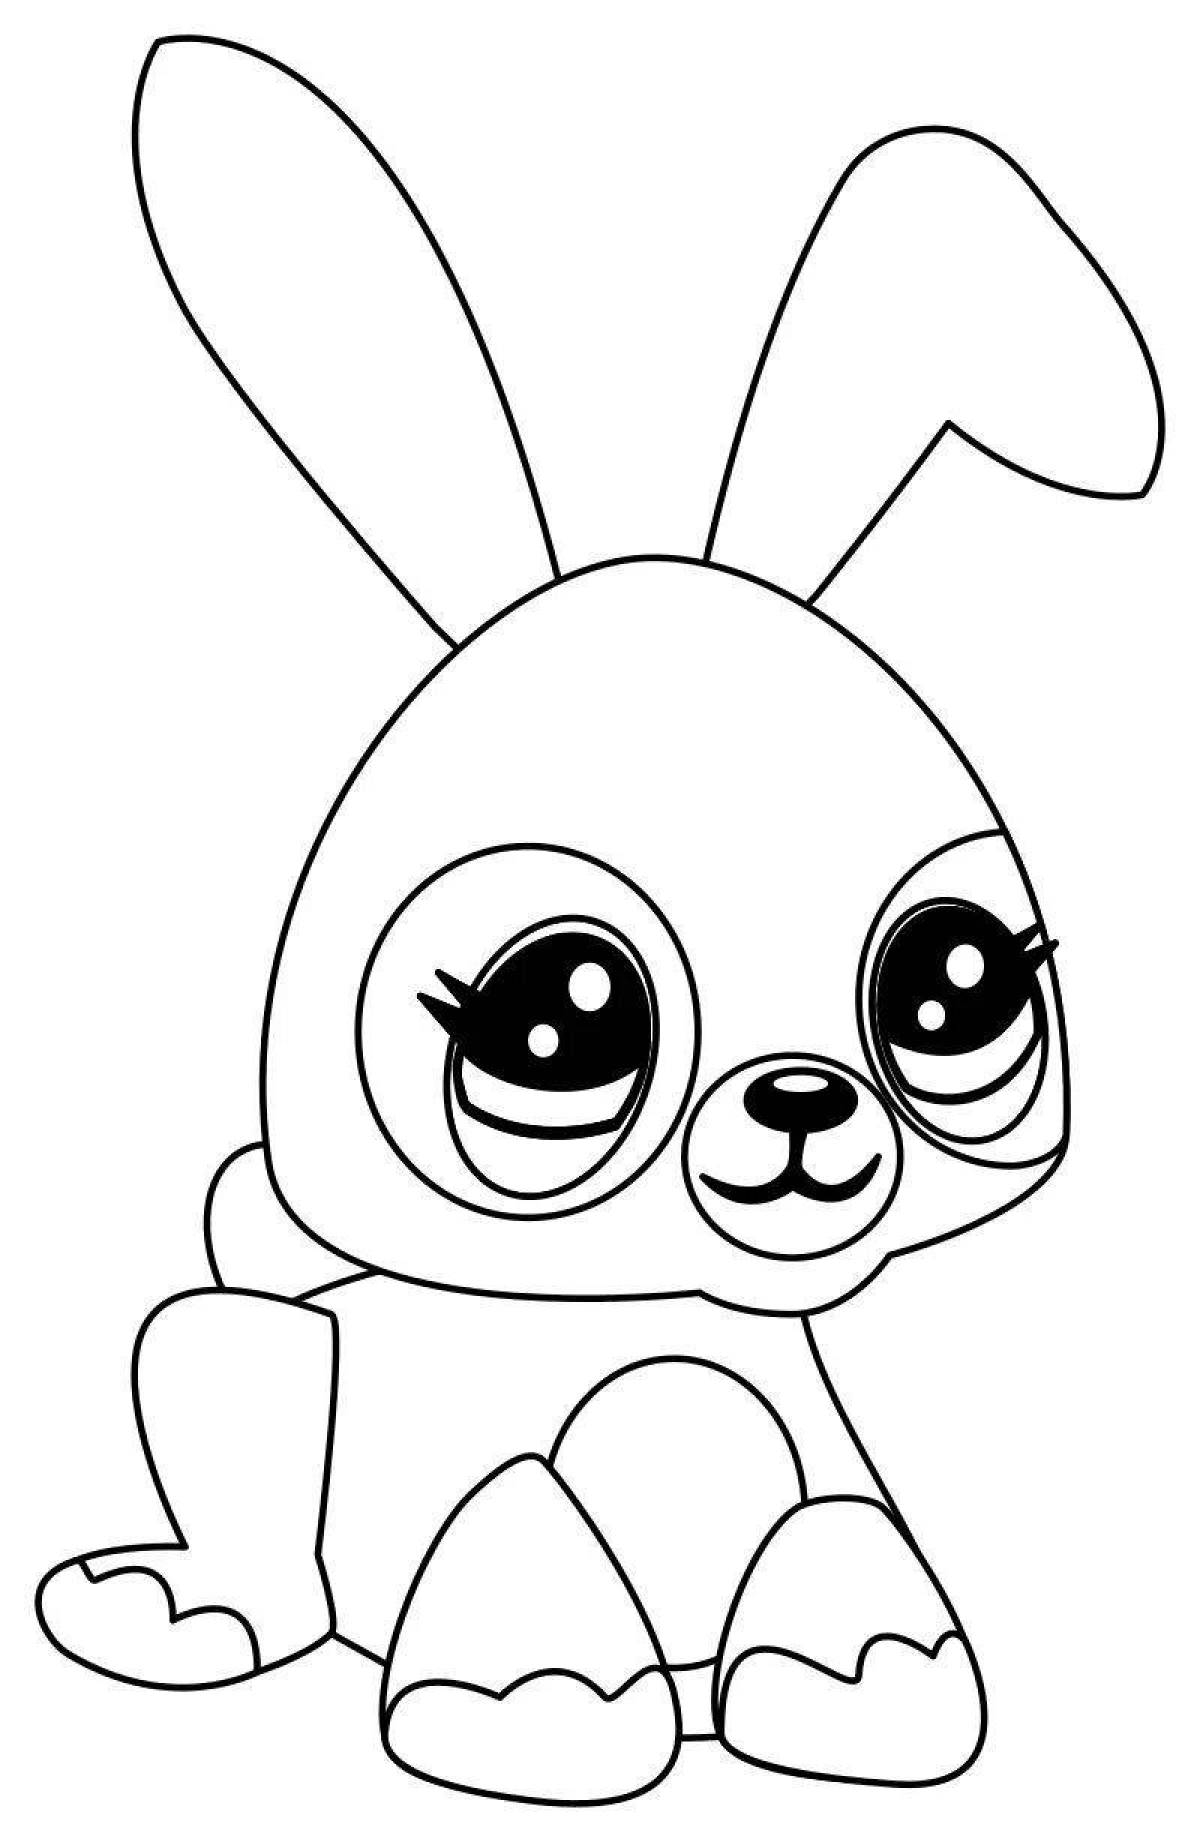 Happy coloring page bunny with a bow